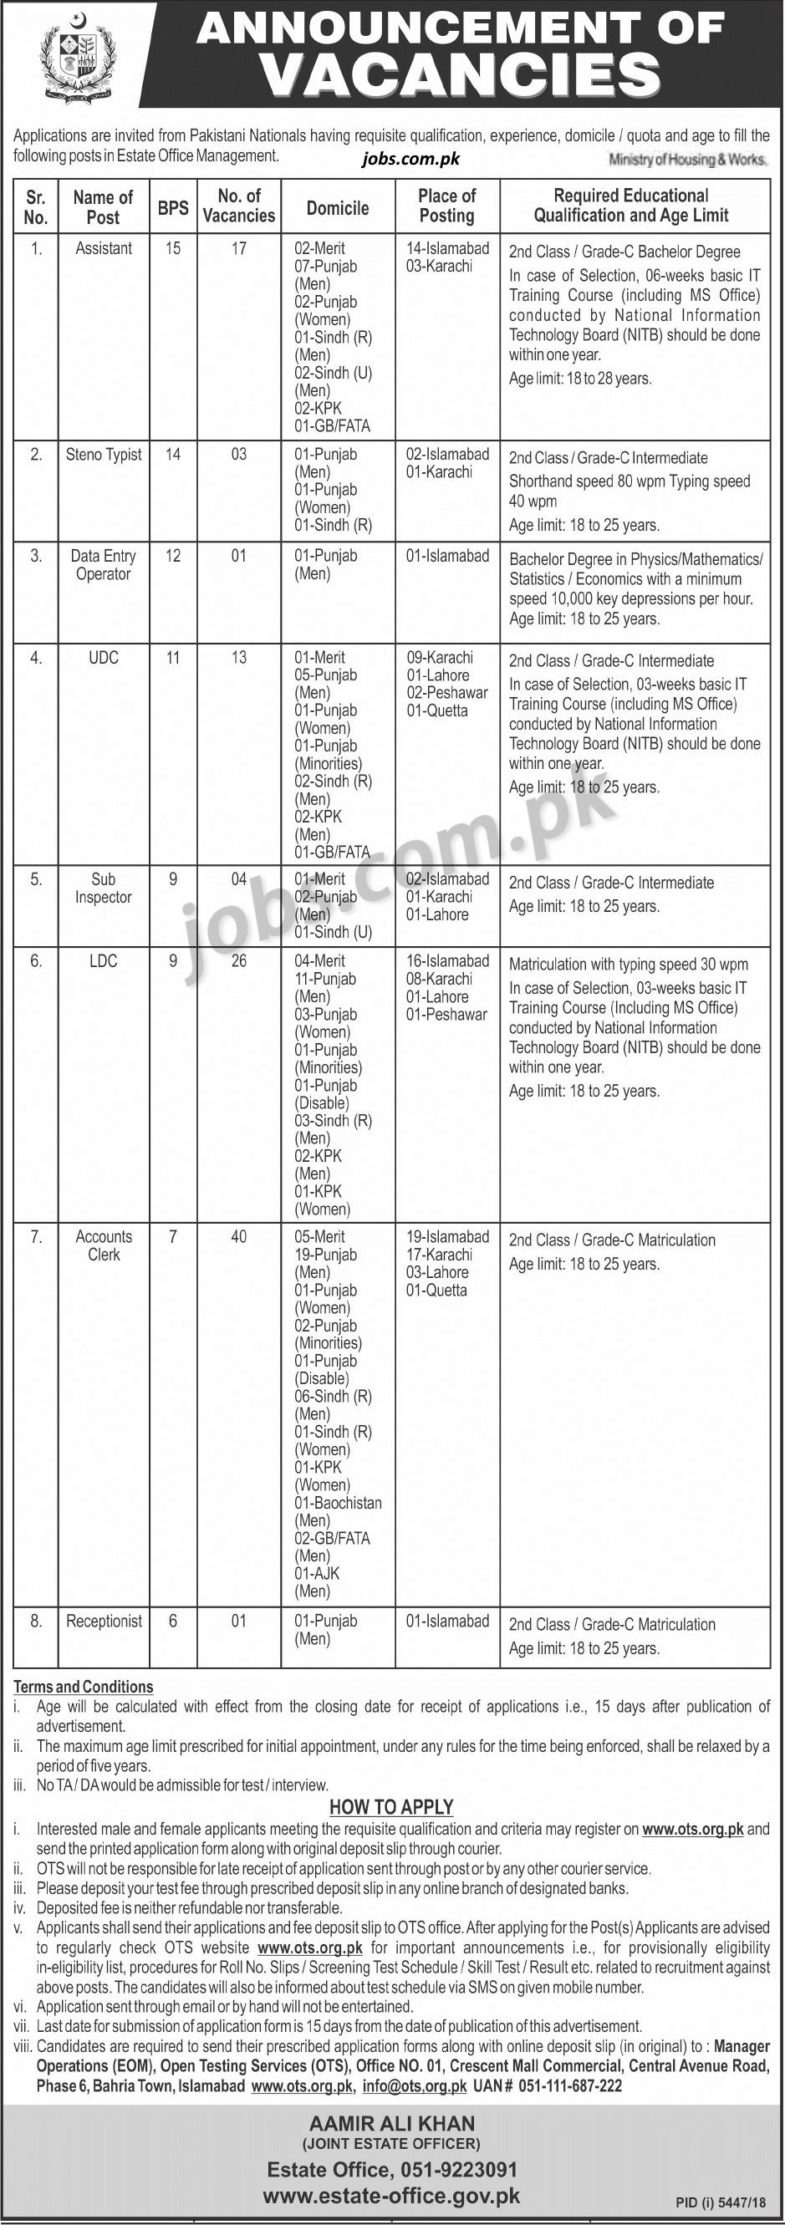 Ministry of Housing & Works Pakistan Jobs 2019 for 105+ Clerks, DEO, Stenotypists, Accounts, Sub-Inspector & Other Posts